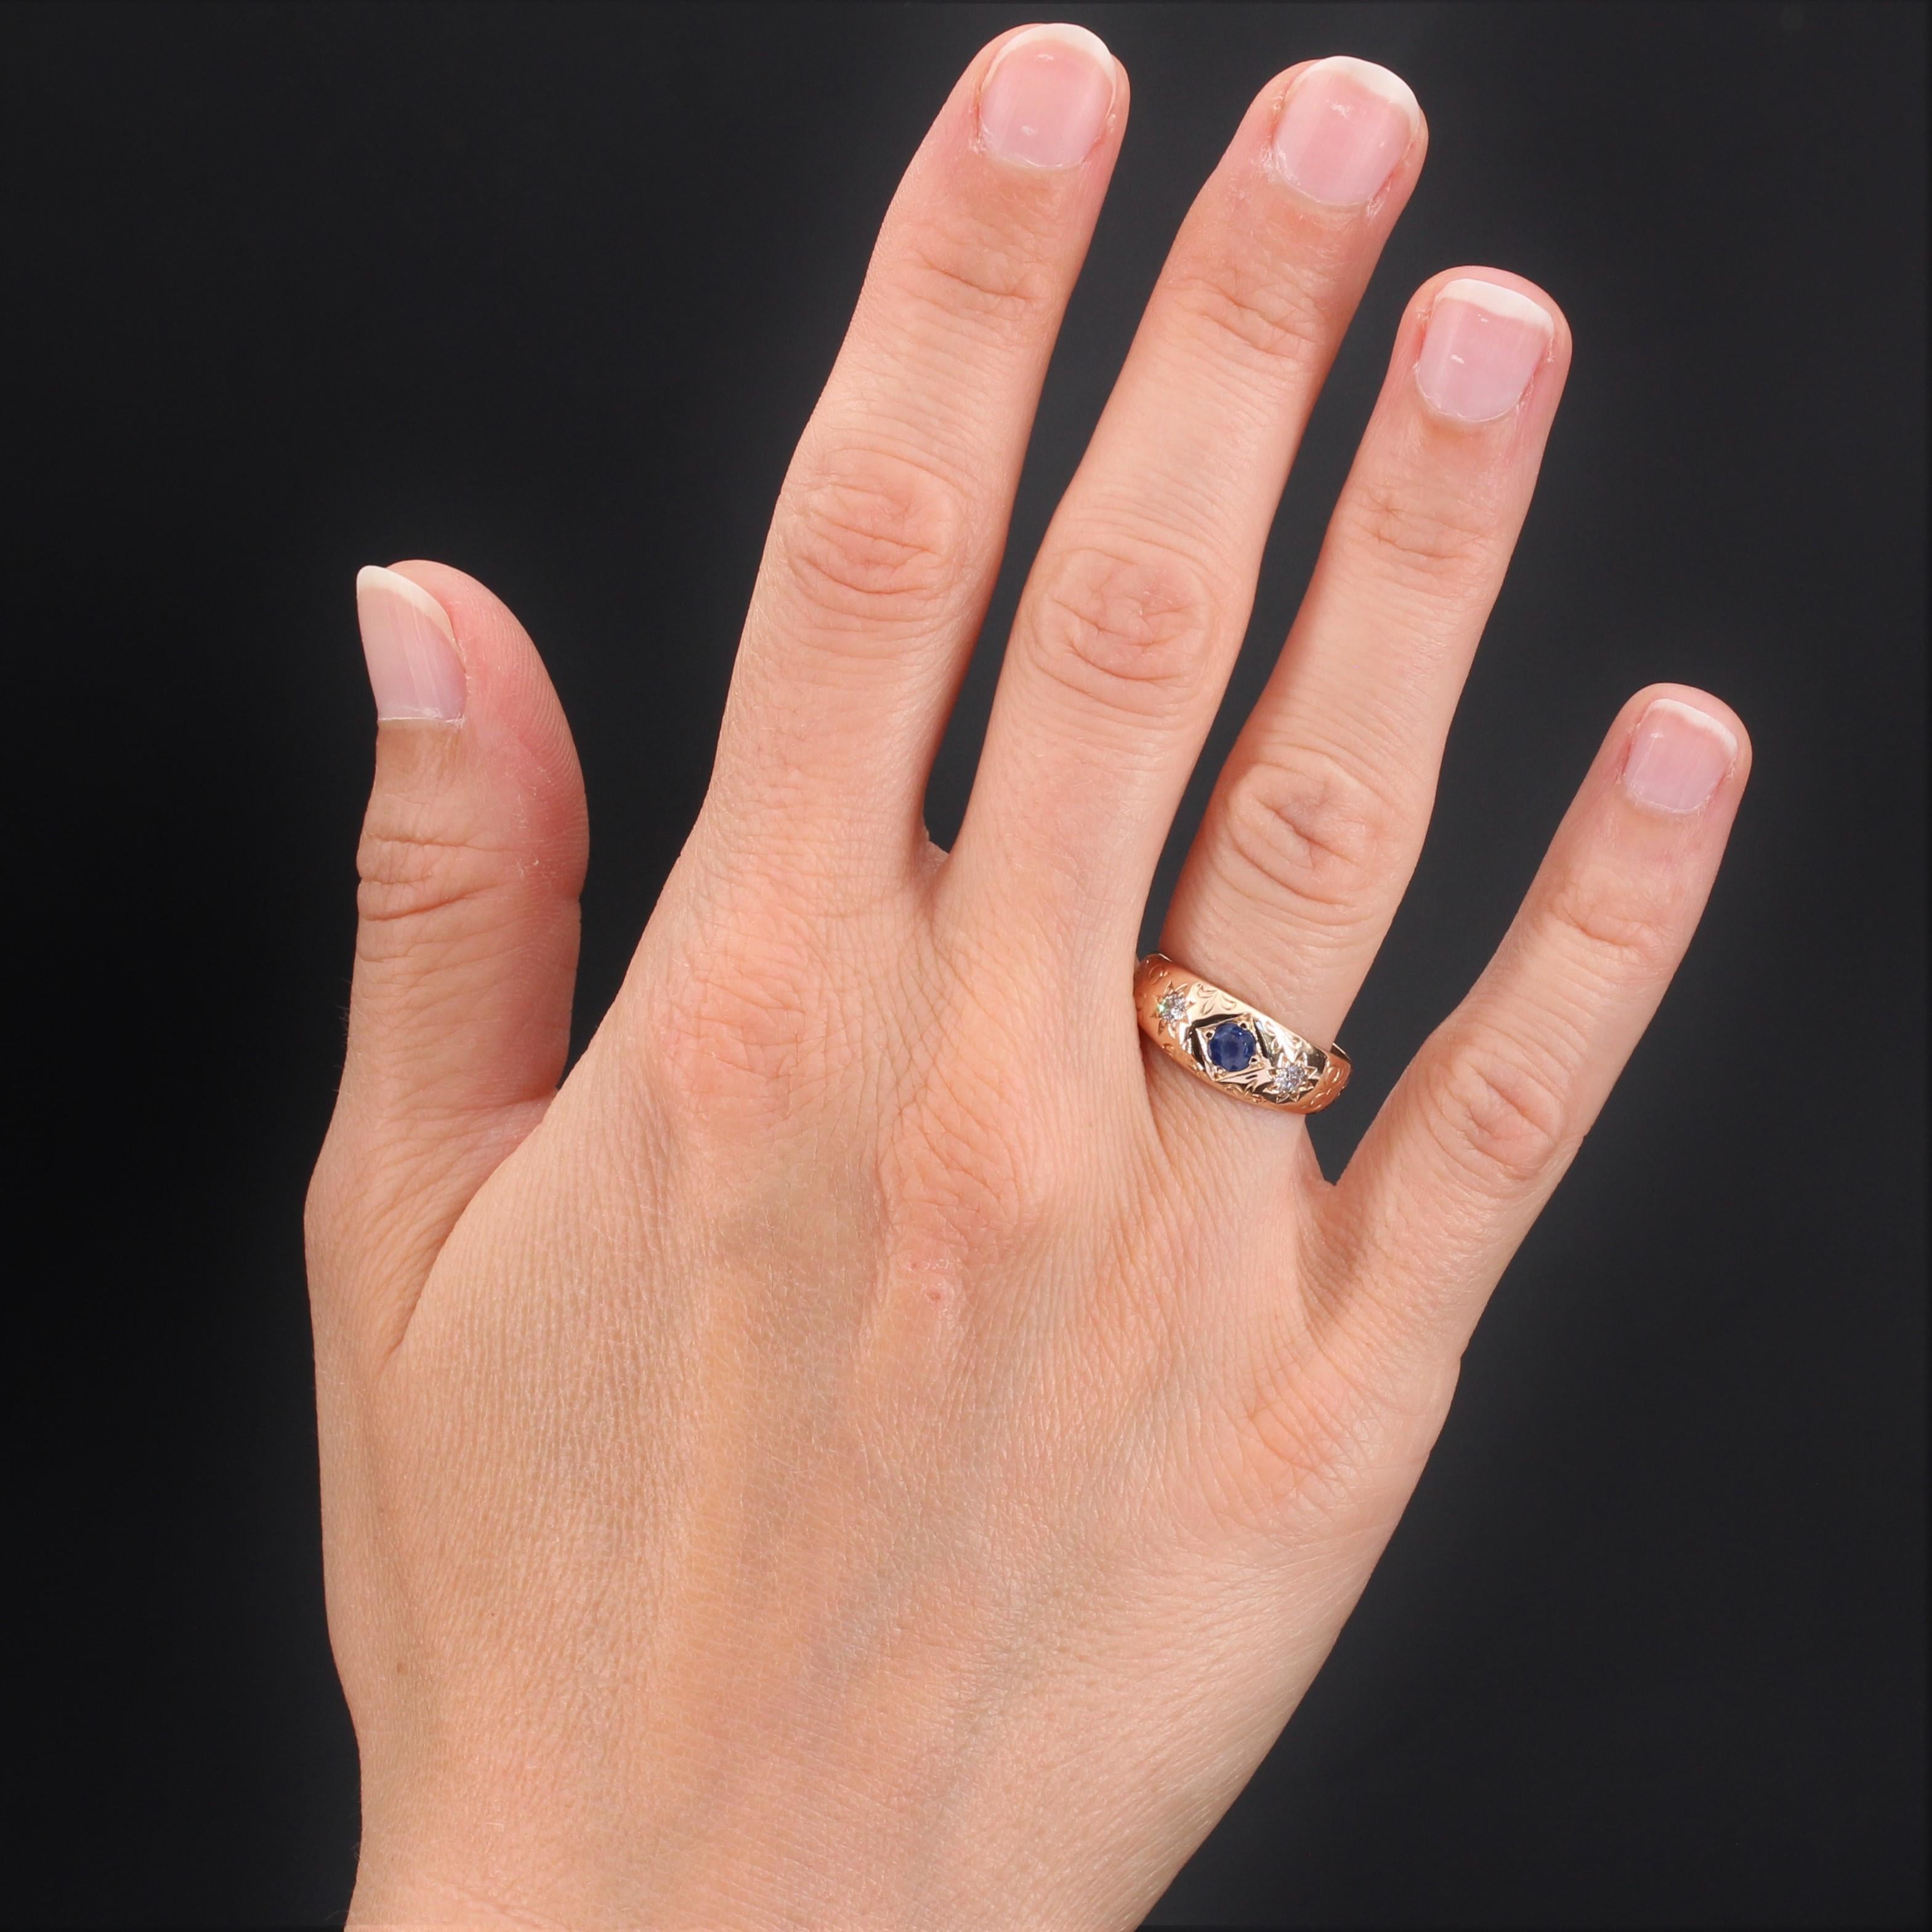 Ring in 14 karat rose gold, shell hallmark.
Pretty antique ring in rose gold, it is chiseled of decorations in arabesques and fleur de lys. In the center is a round sapphire in a square design accompanied on both sides by 2 x 1 diamond in star